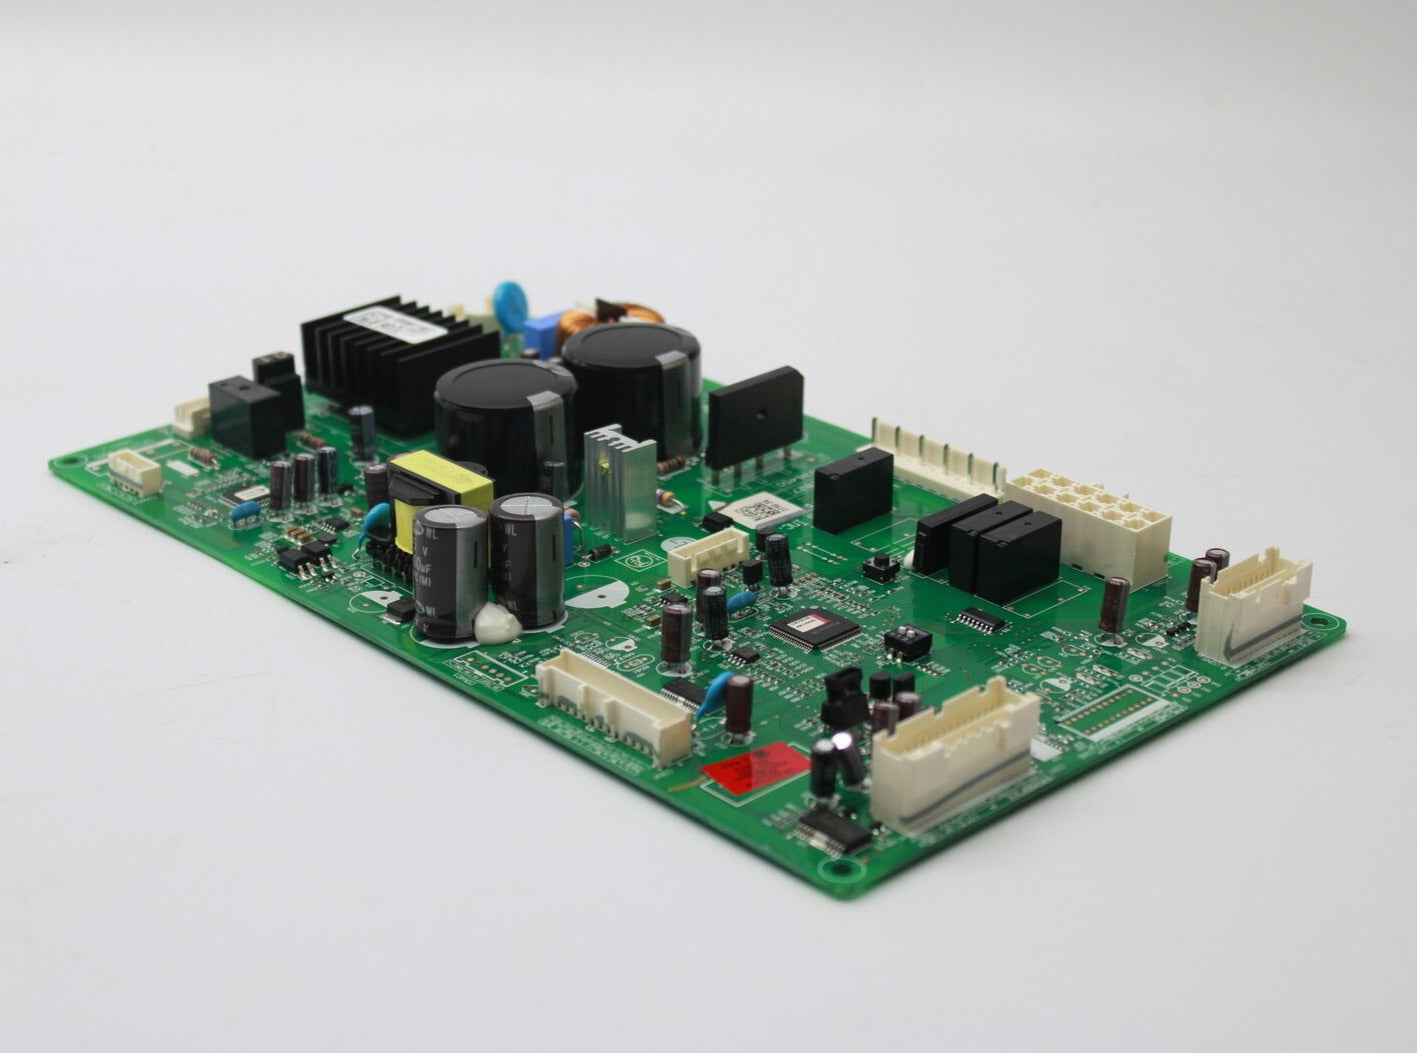 LG Refrigerator Main Control Board Assembly OEM - EBR81182790, Replaces: AP6976726 PS12742546 EAP12742546 PD00075038